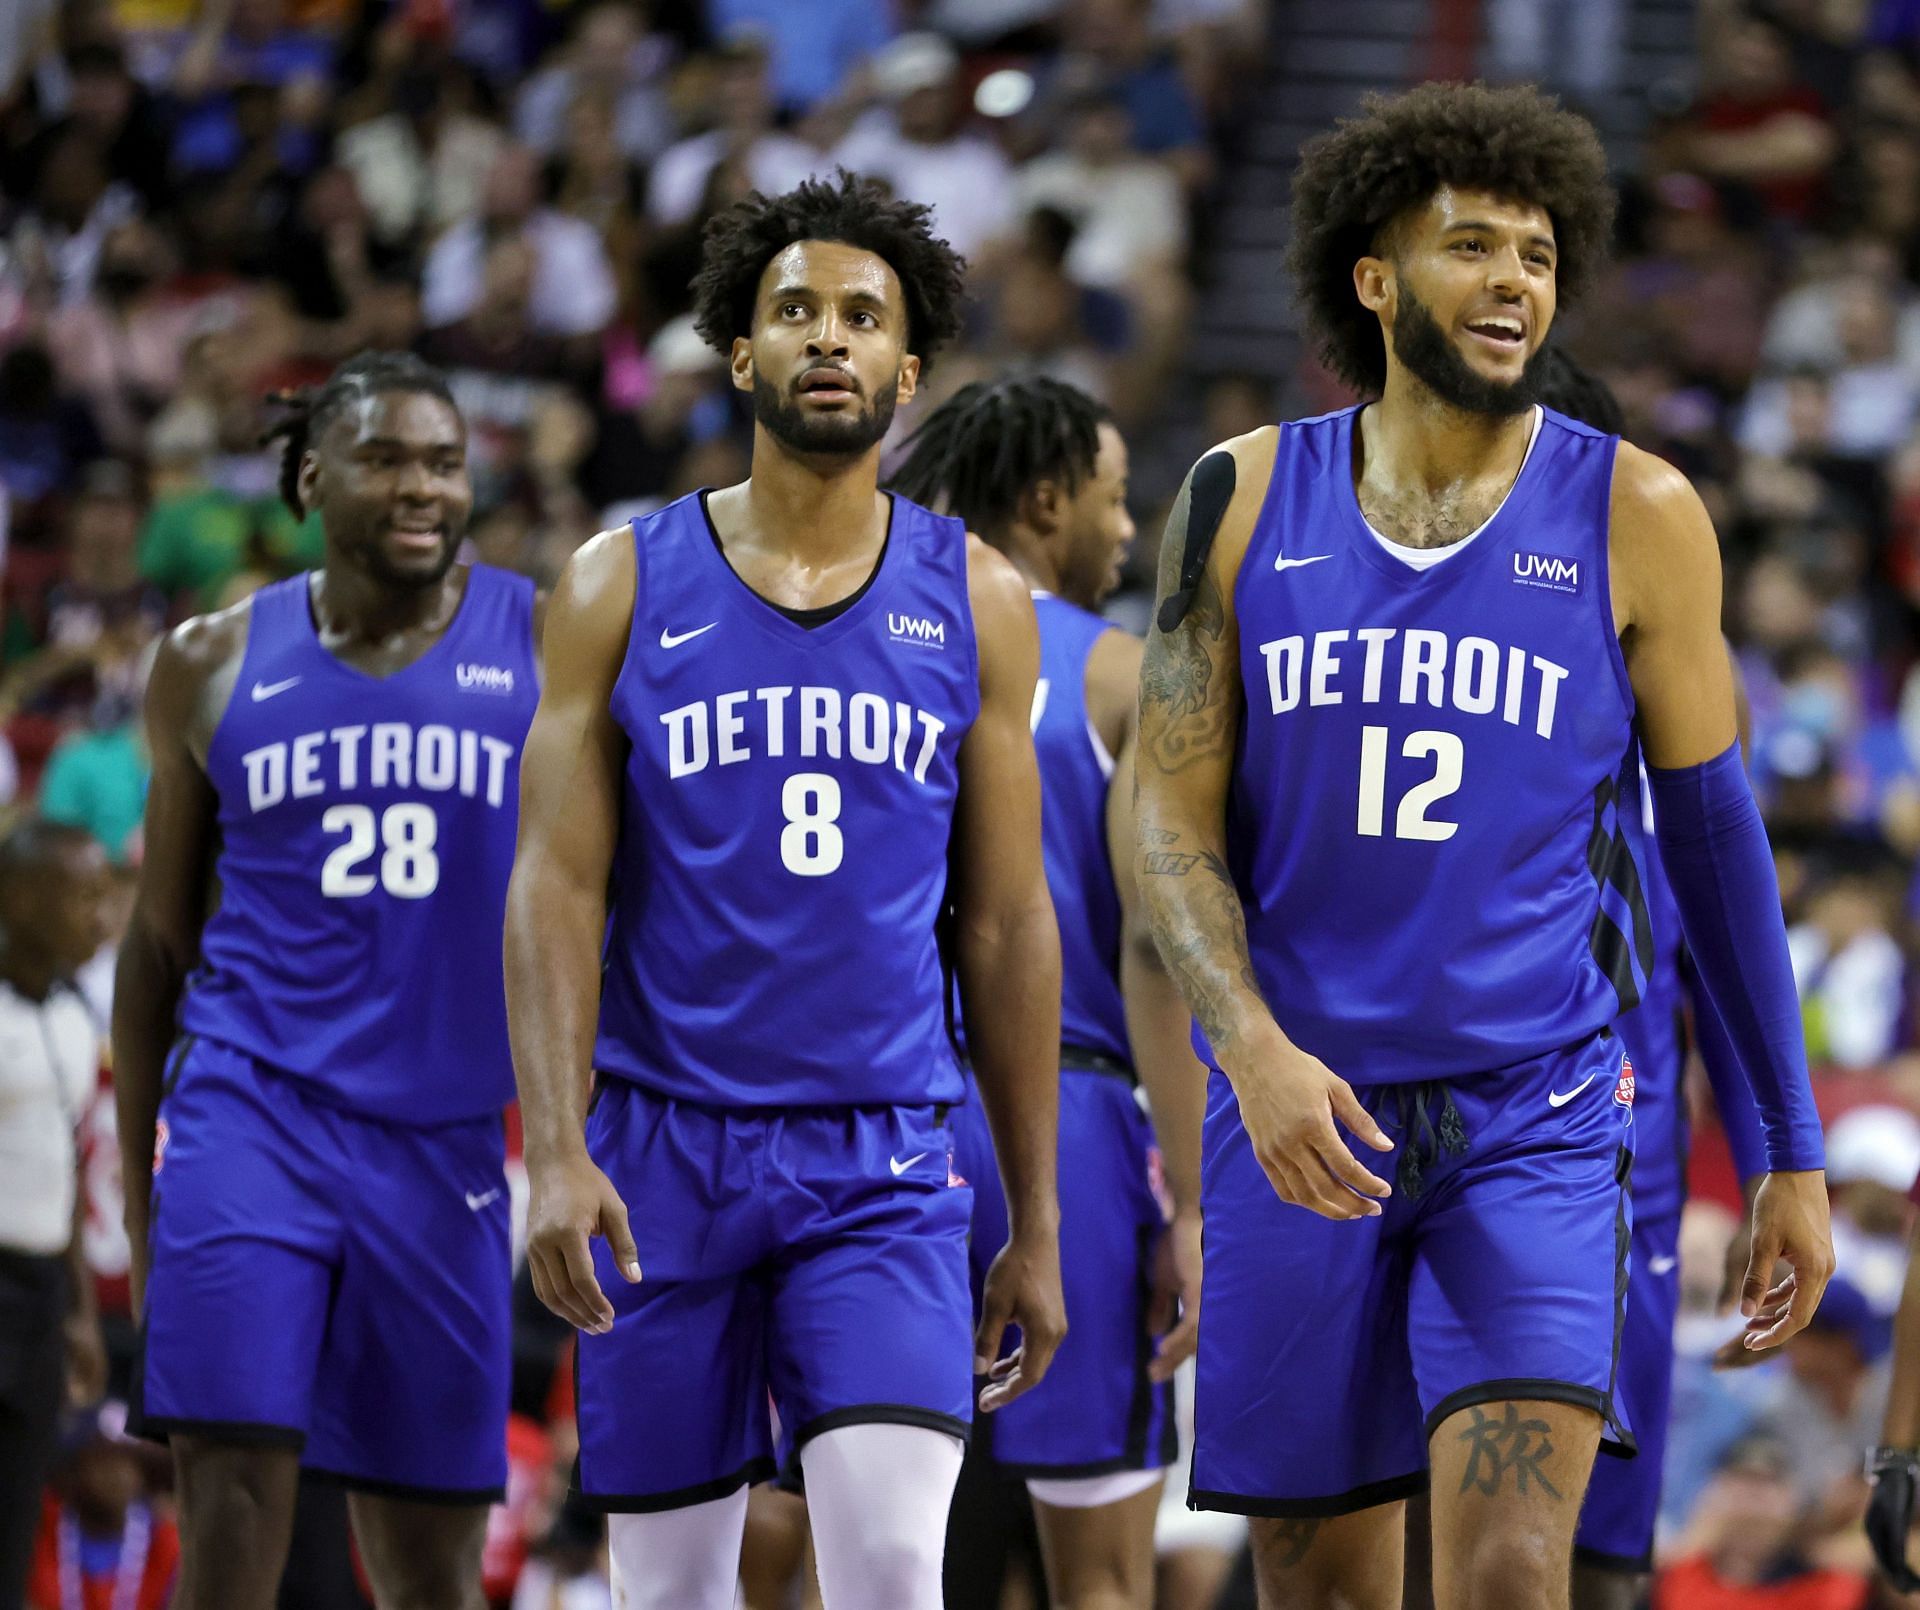 The Detroit Pistons will be looking to bag a win against the Magic in their final Summer League.